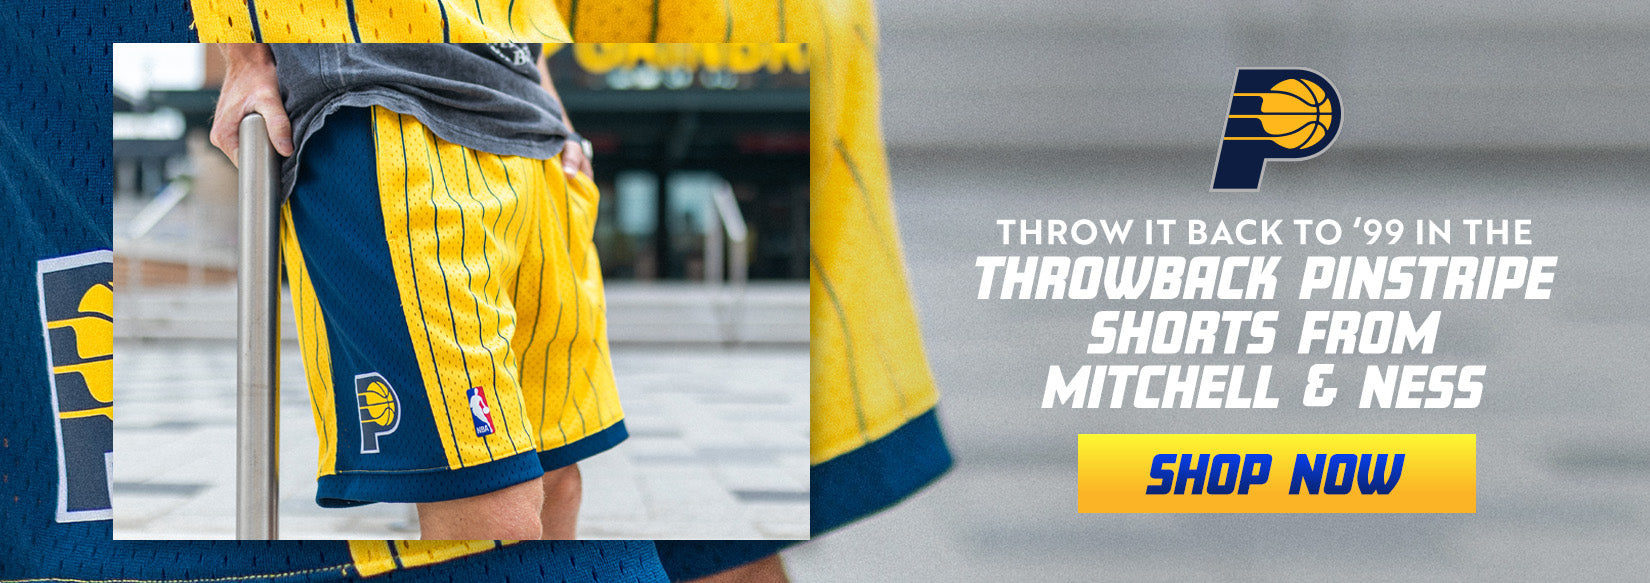 Throw It Back To '99 In The Throwback Pinstripe Shorts From Mitchell & Ness SHOP NOW